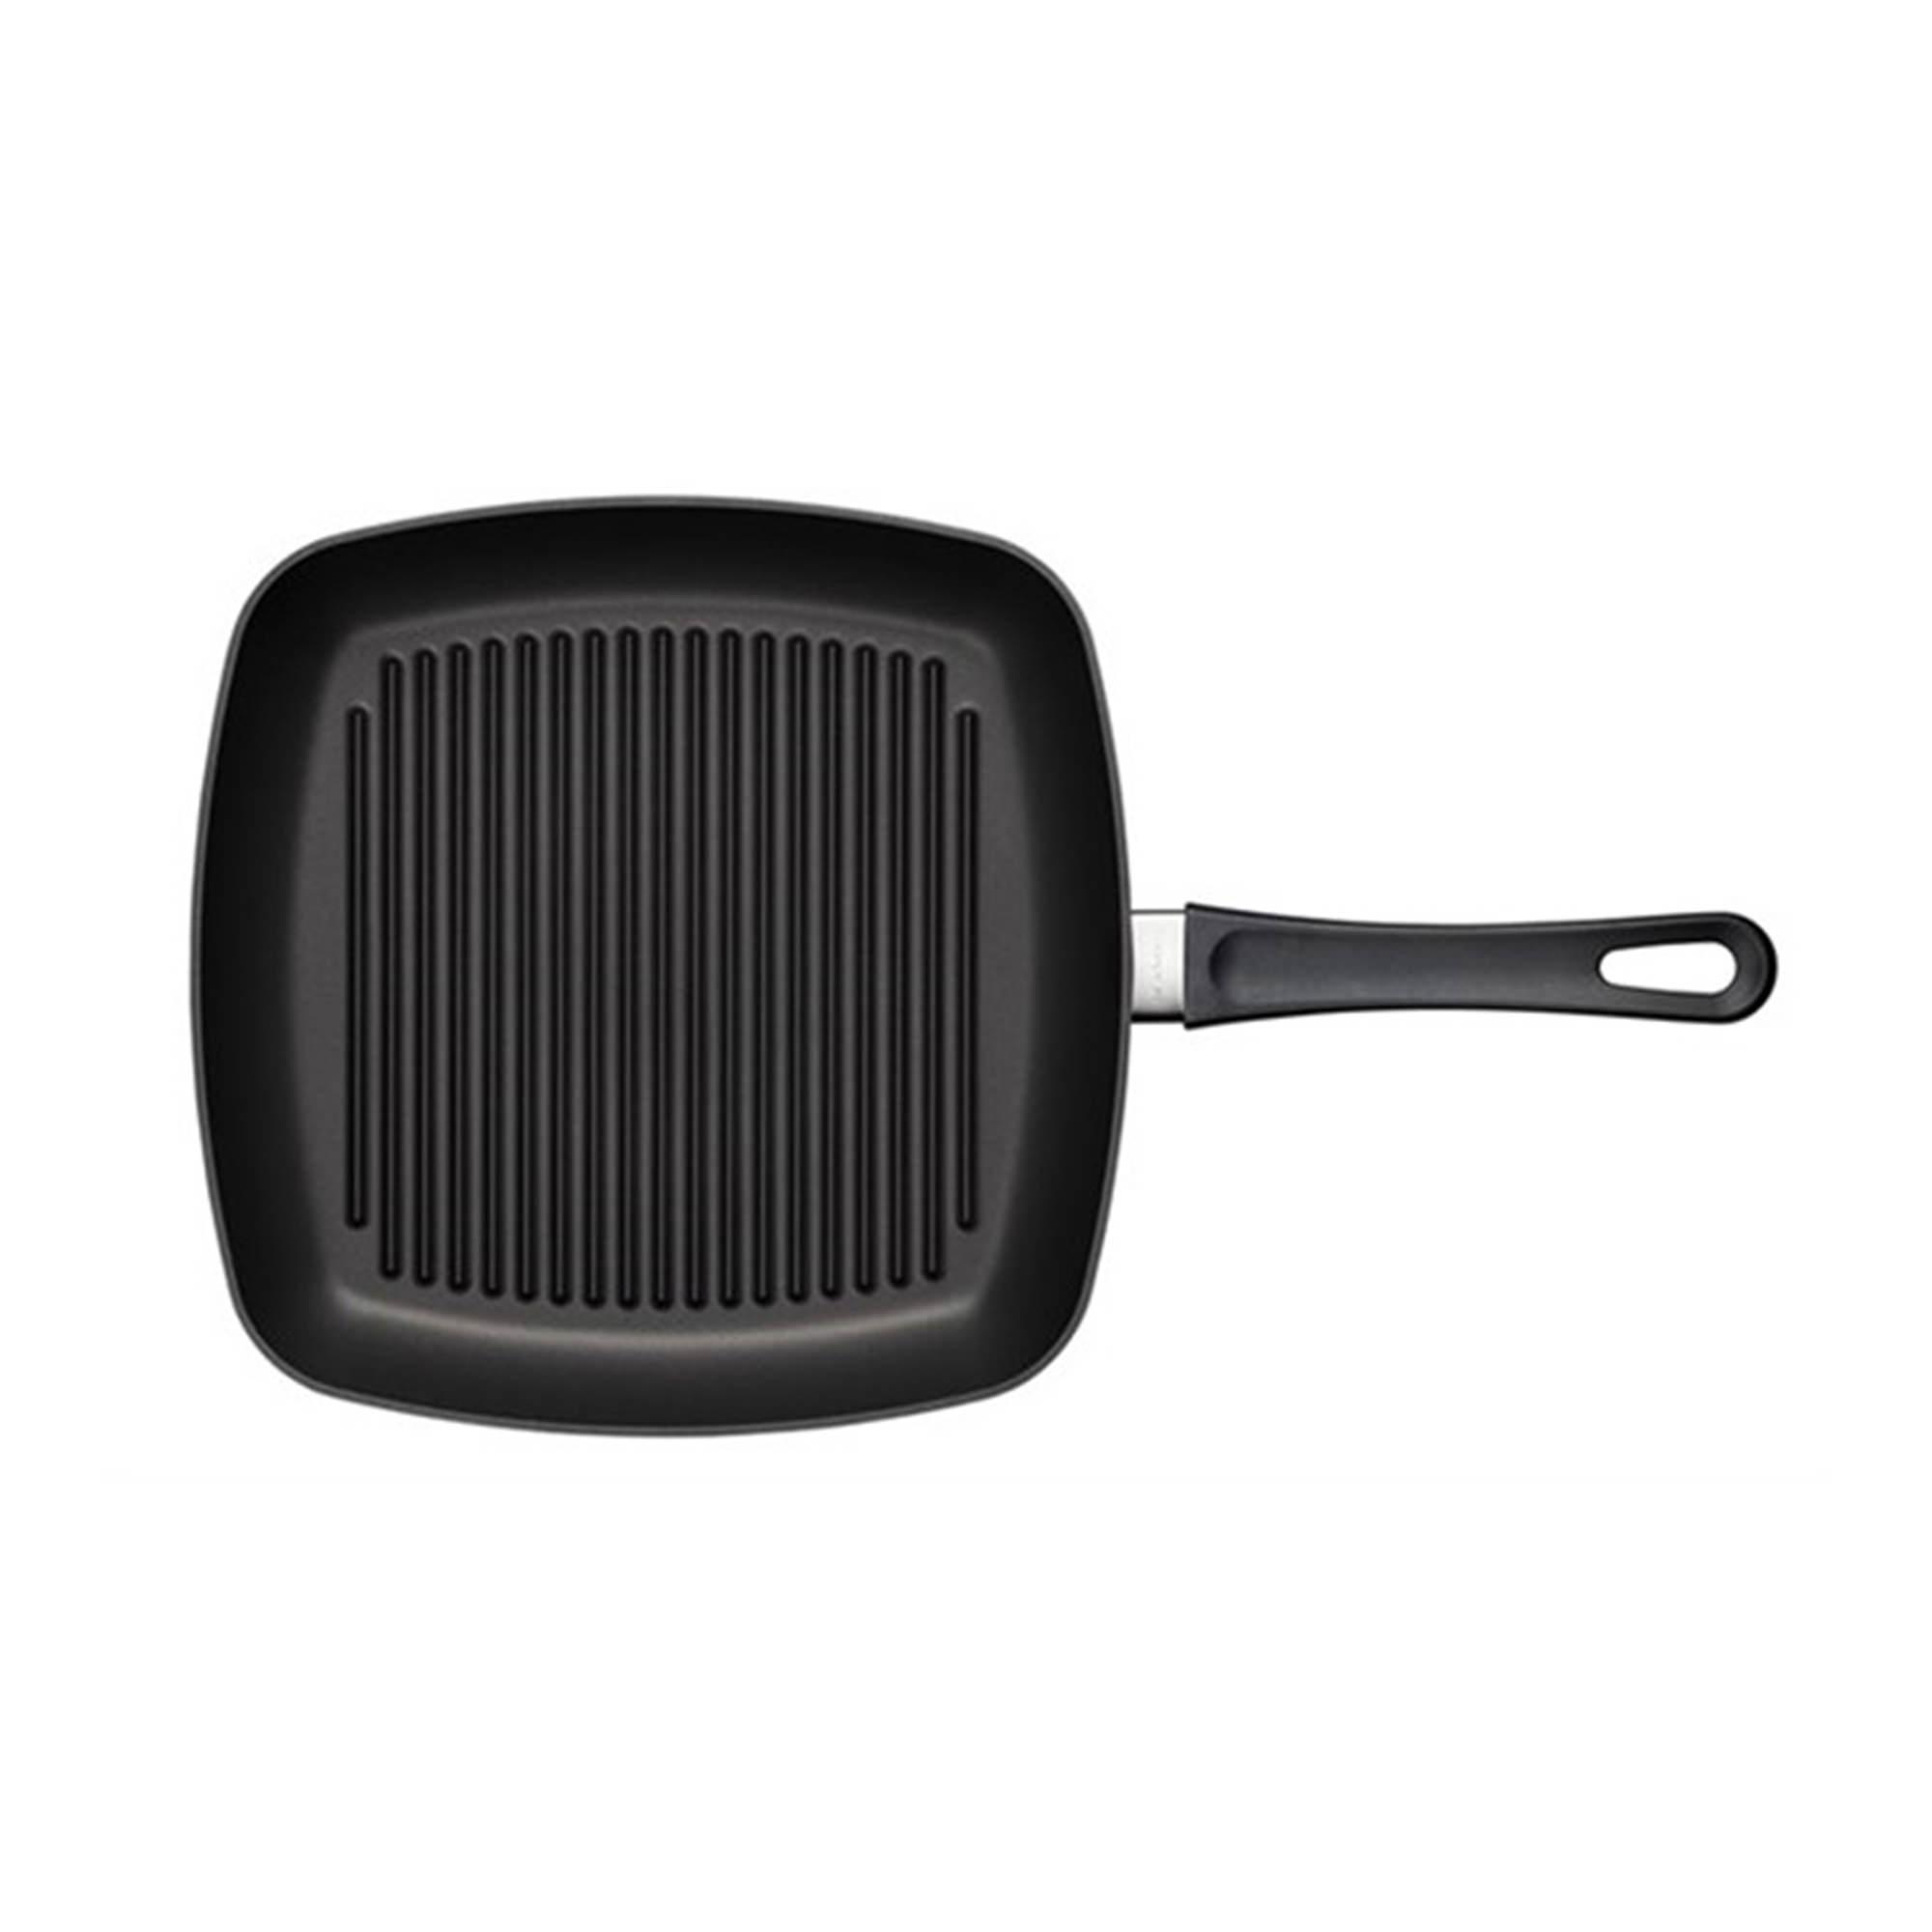 Scanpan Classic Induction Square Grill Pan 27cm Image 3